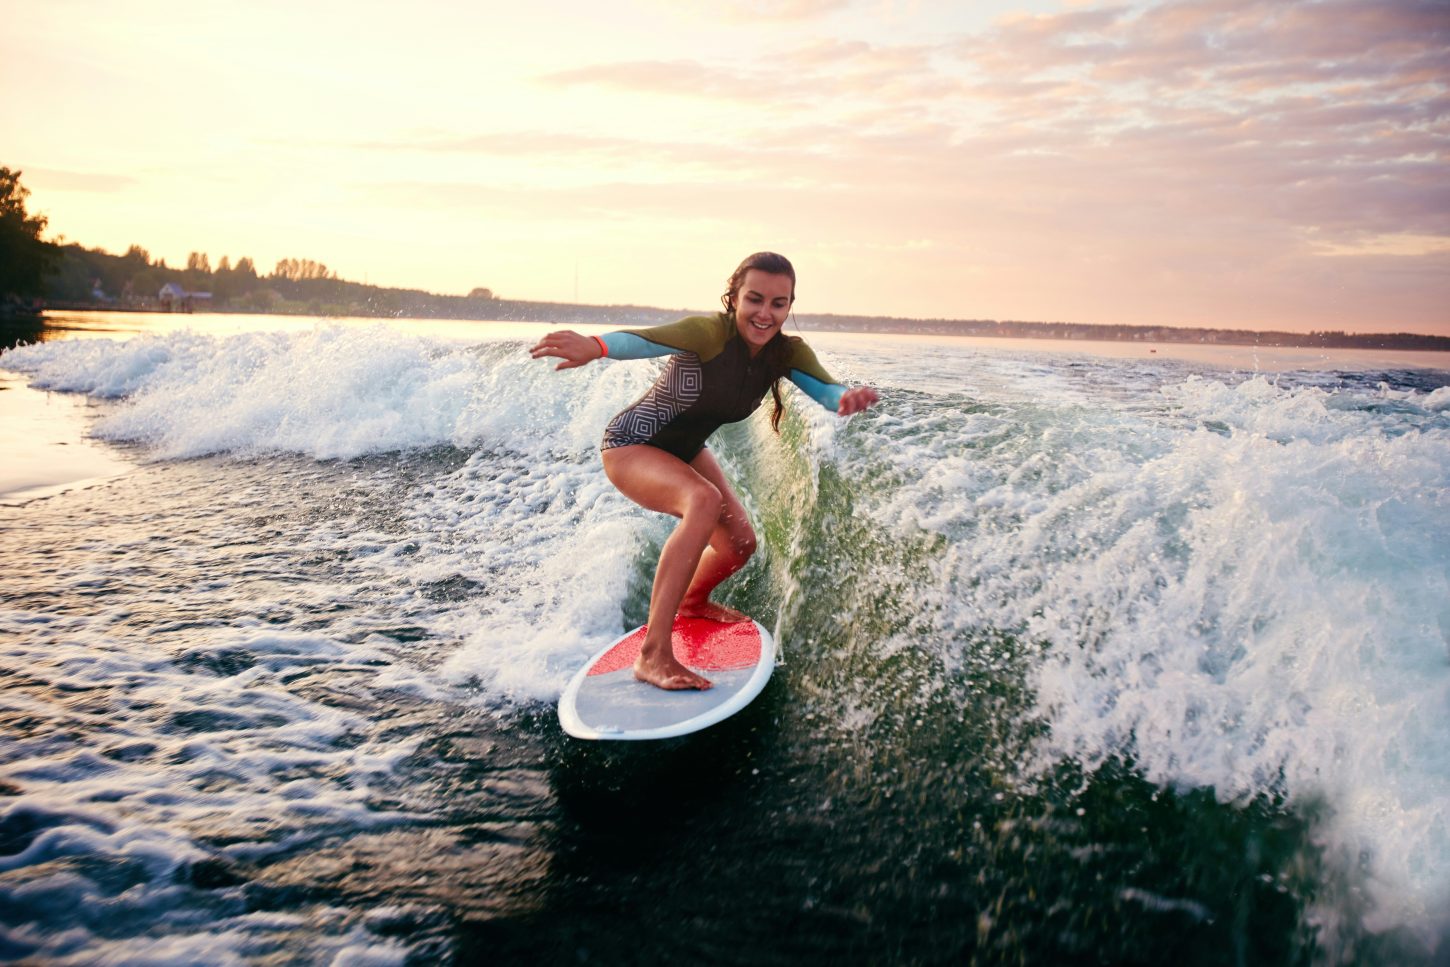 Girl surfing a wave at sunset.